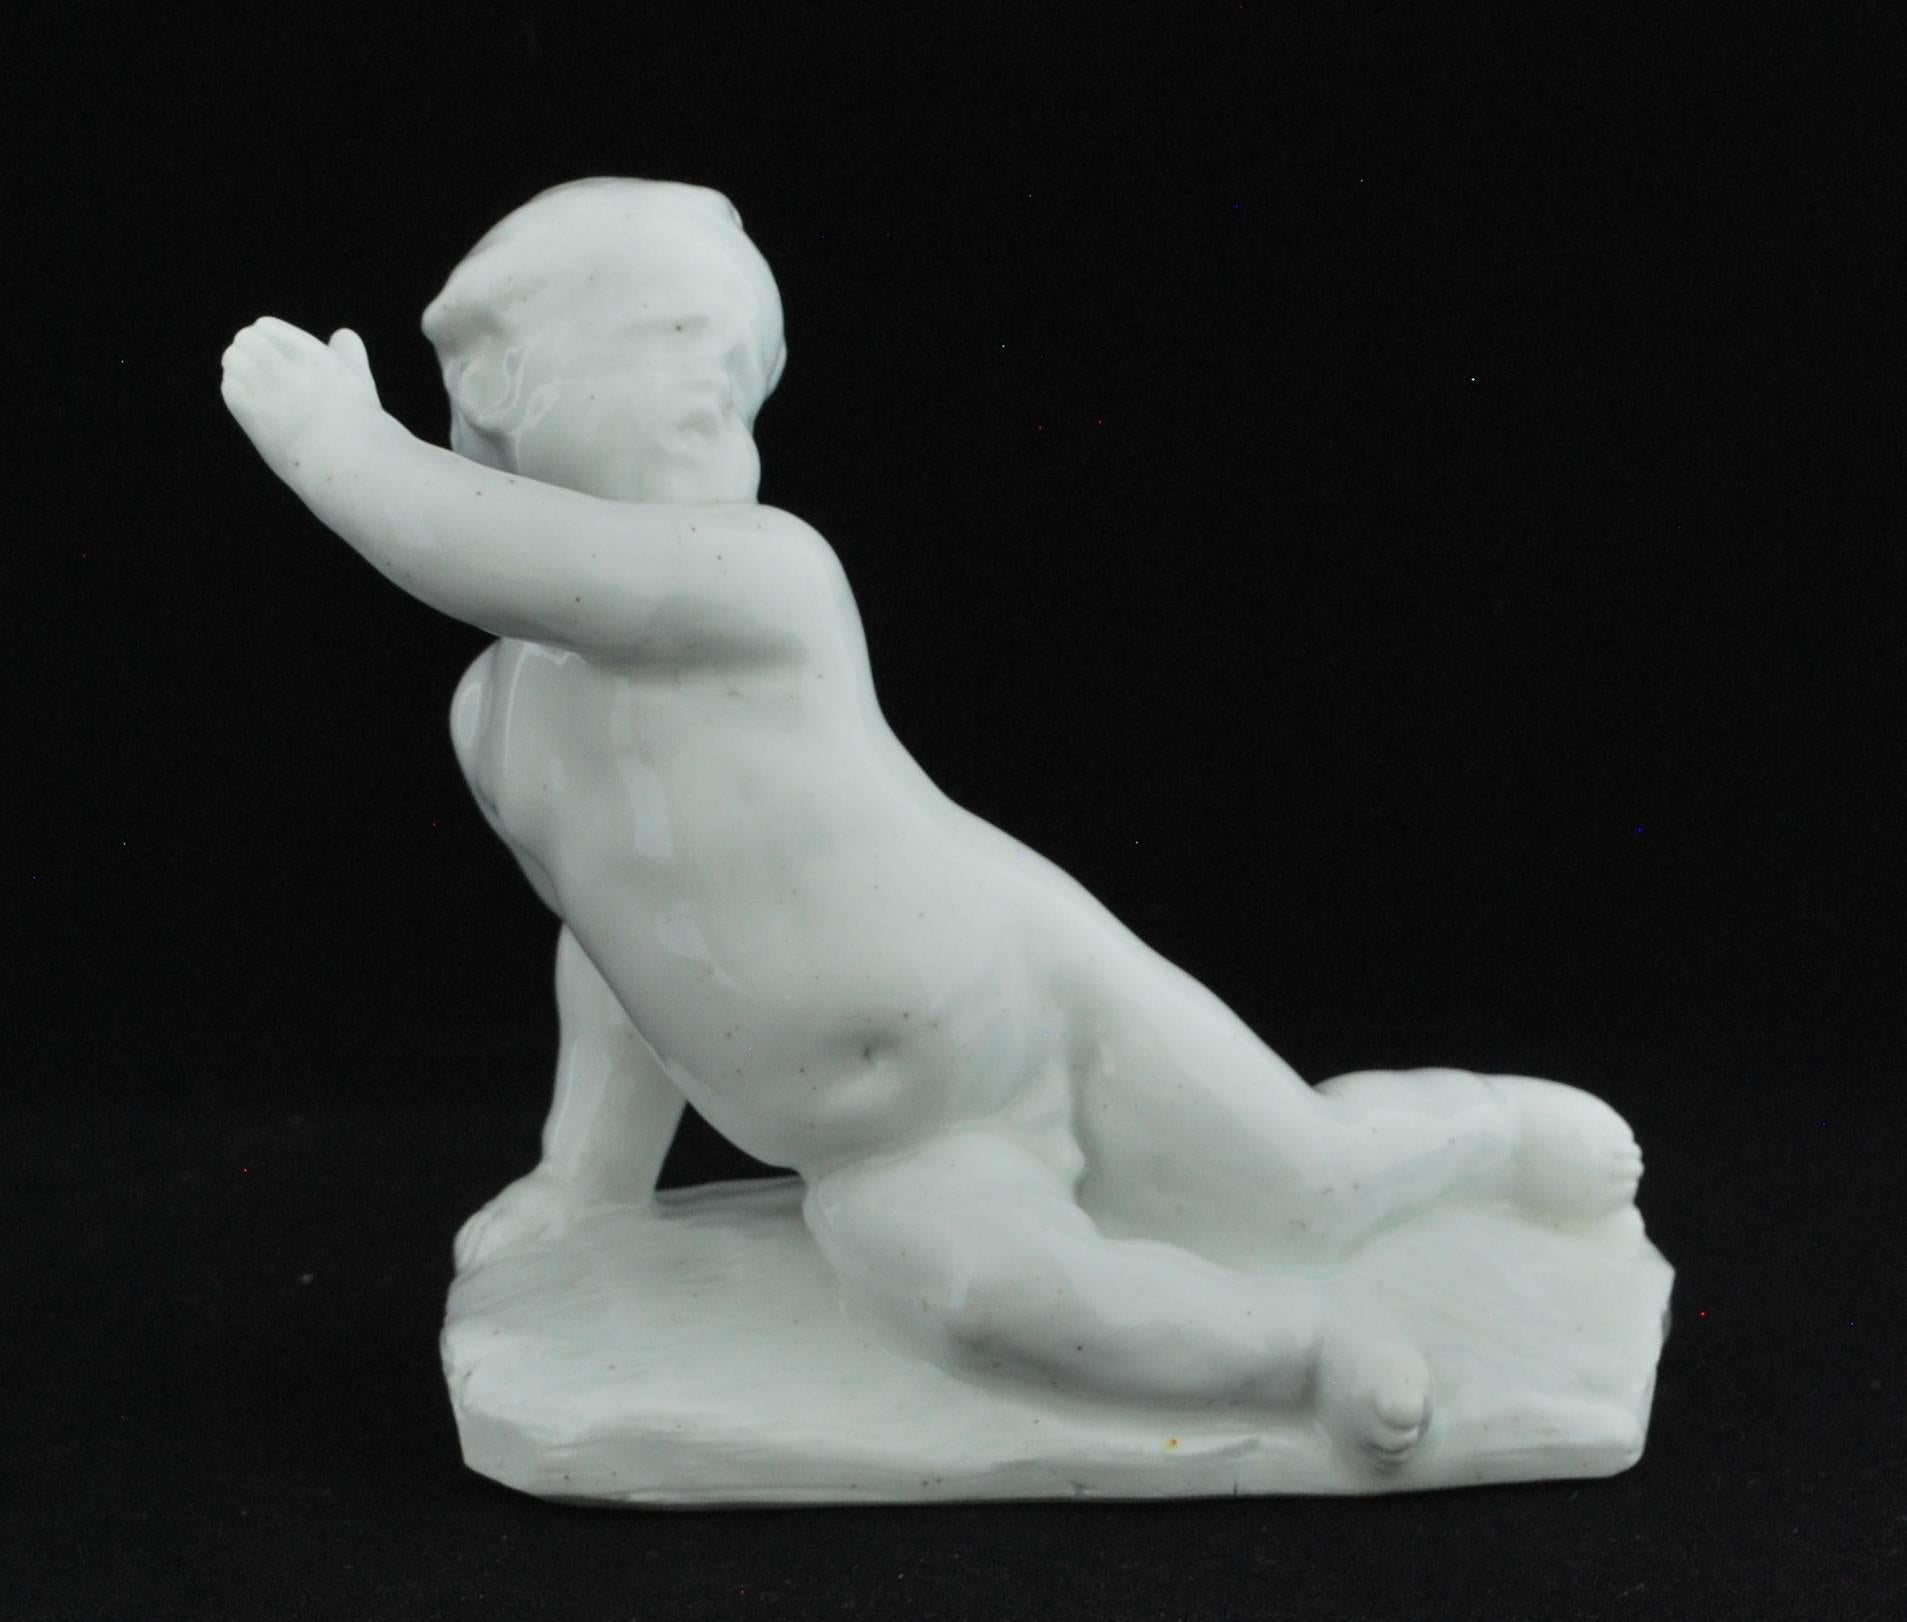 Presumably based on the work of the Flemish sculptor François Duquesnoy (1597-1643), also known as Il Fiammingo. 

A small series of Chelsea figures from the late 1740s was also based on his work; and Wedgwood also produced five examples.